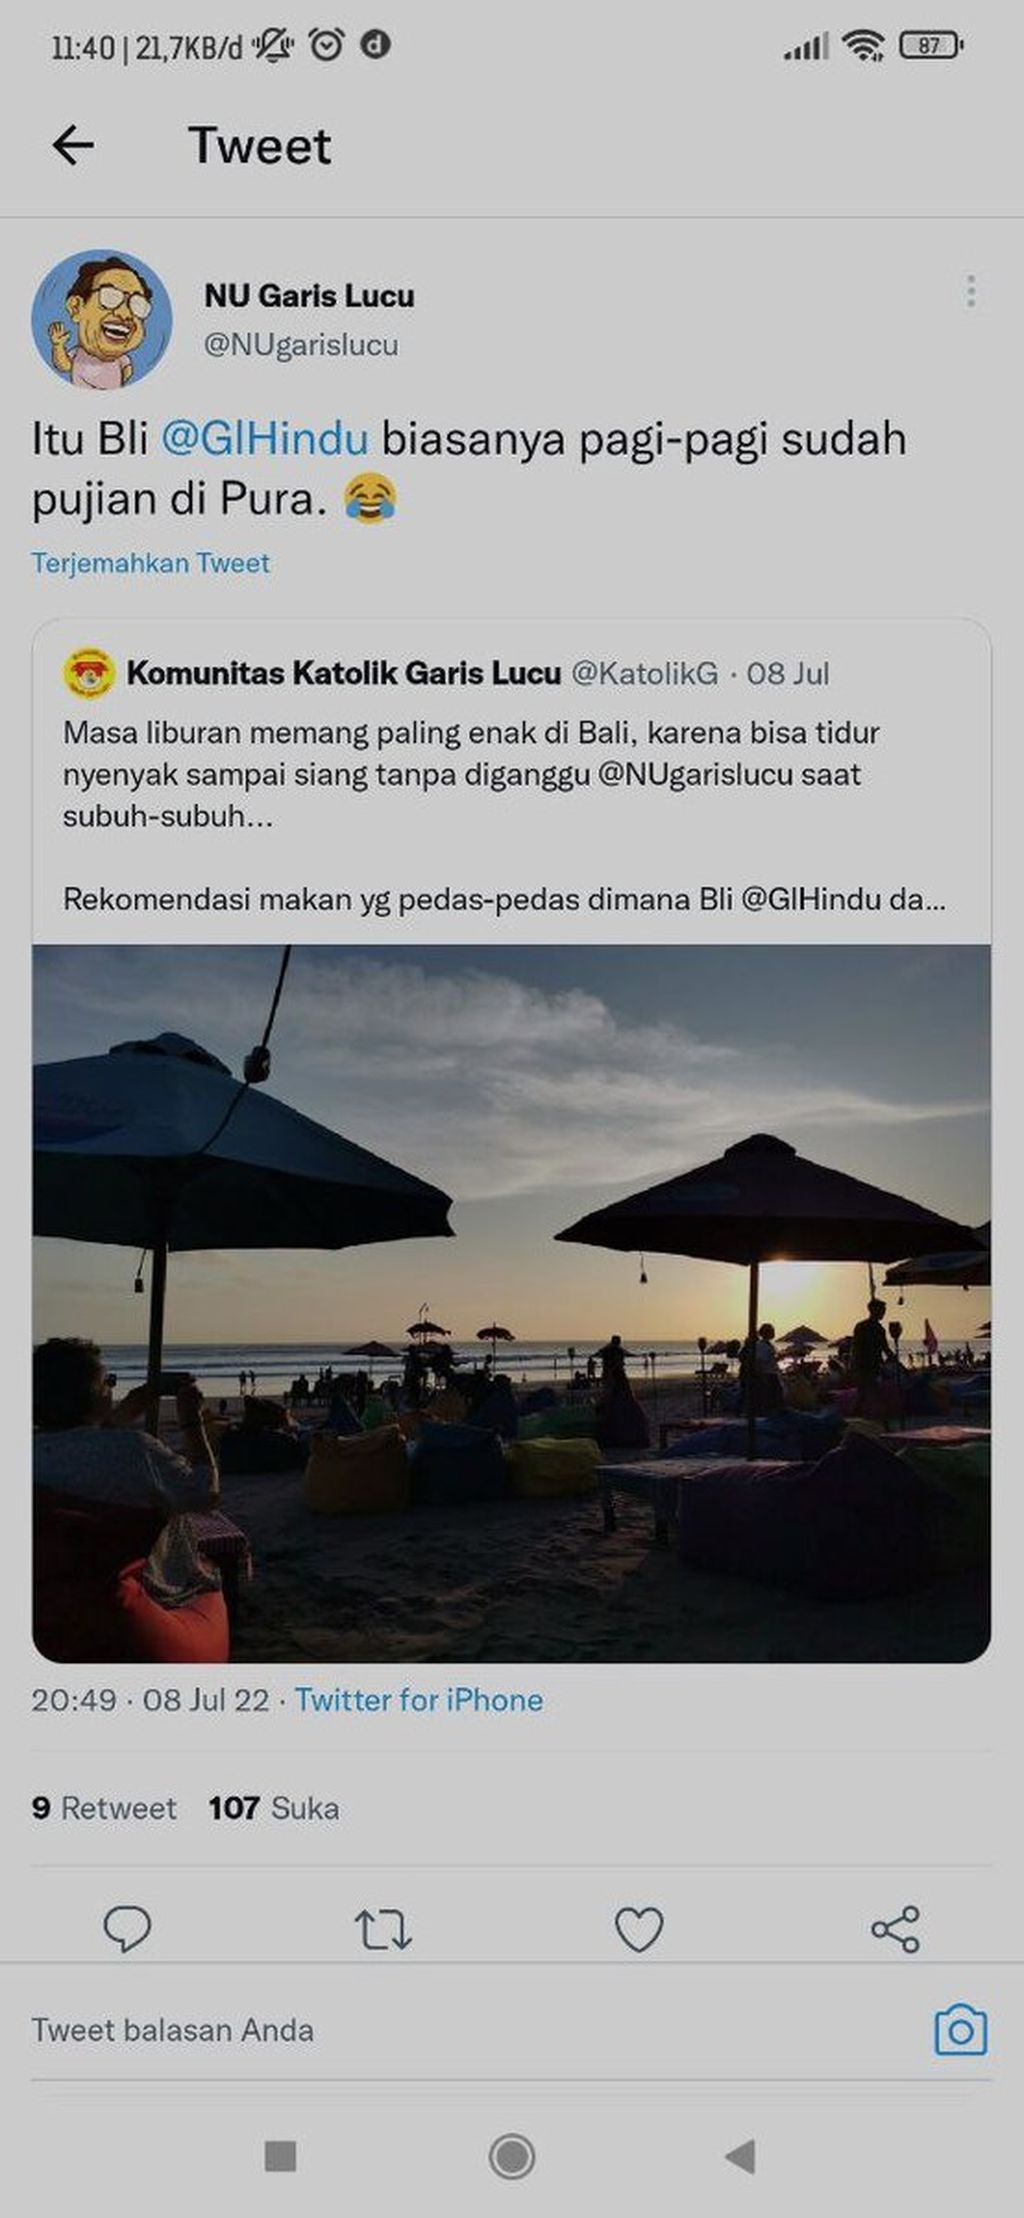 One of the tweets from the NU's Garis Lucu @NUgarislucu Twitter account which incites religious awareness and tolerance in Indonesia. These funny lines religious accounts were created to ward off hate speech and issues of intolerance that are rife on social media.